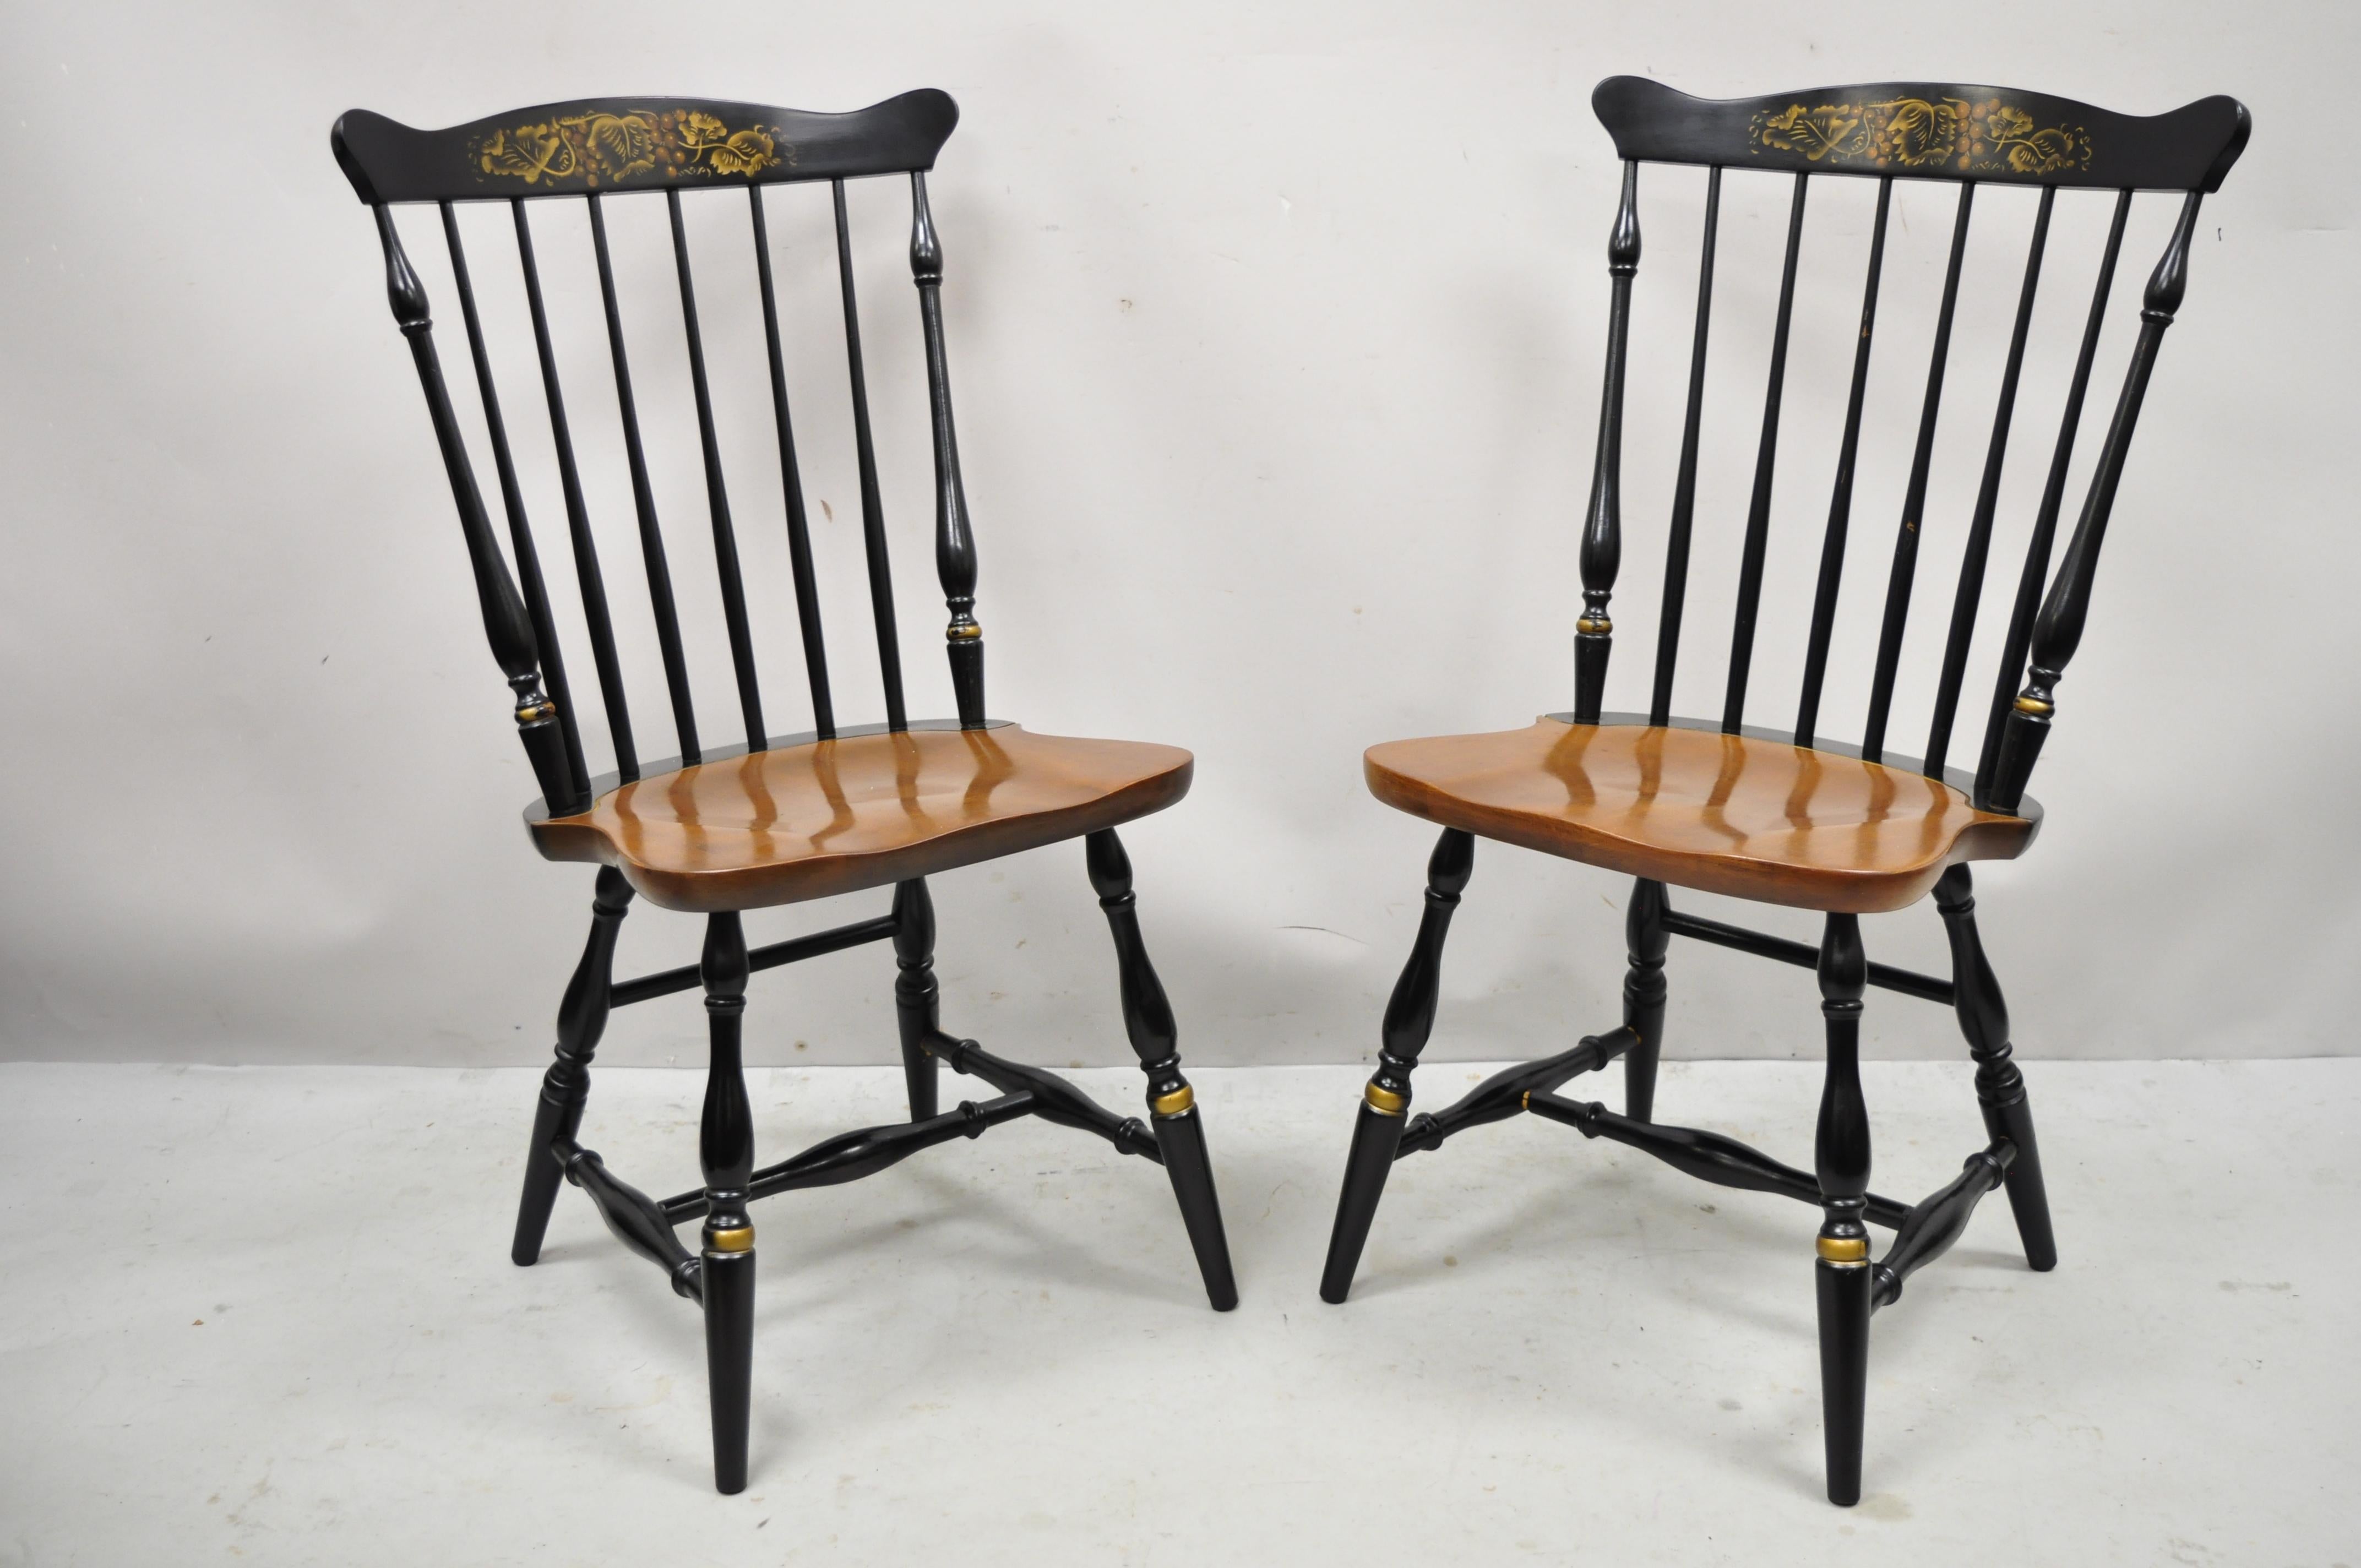 Vintage L. Hitchcock black stenciled Harvest painted maple Windsor dining chairs - a pair. Item features black ebonized finish, stencil painted harvest design, quality American craftsmanship. Circa mid-20th century. Measurements: 36